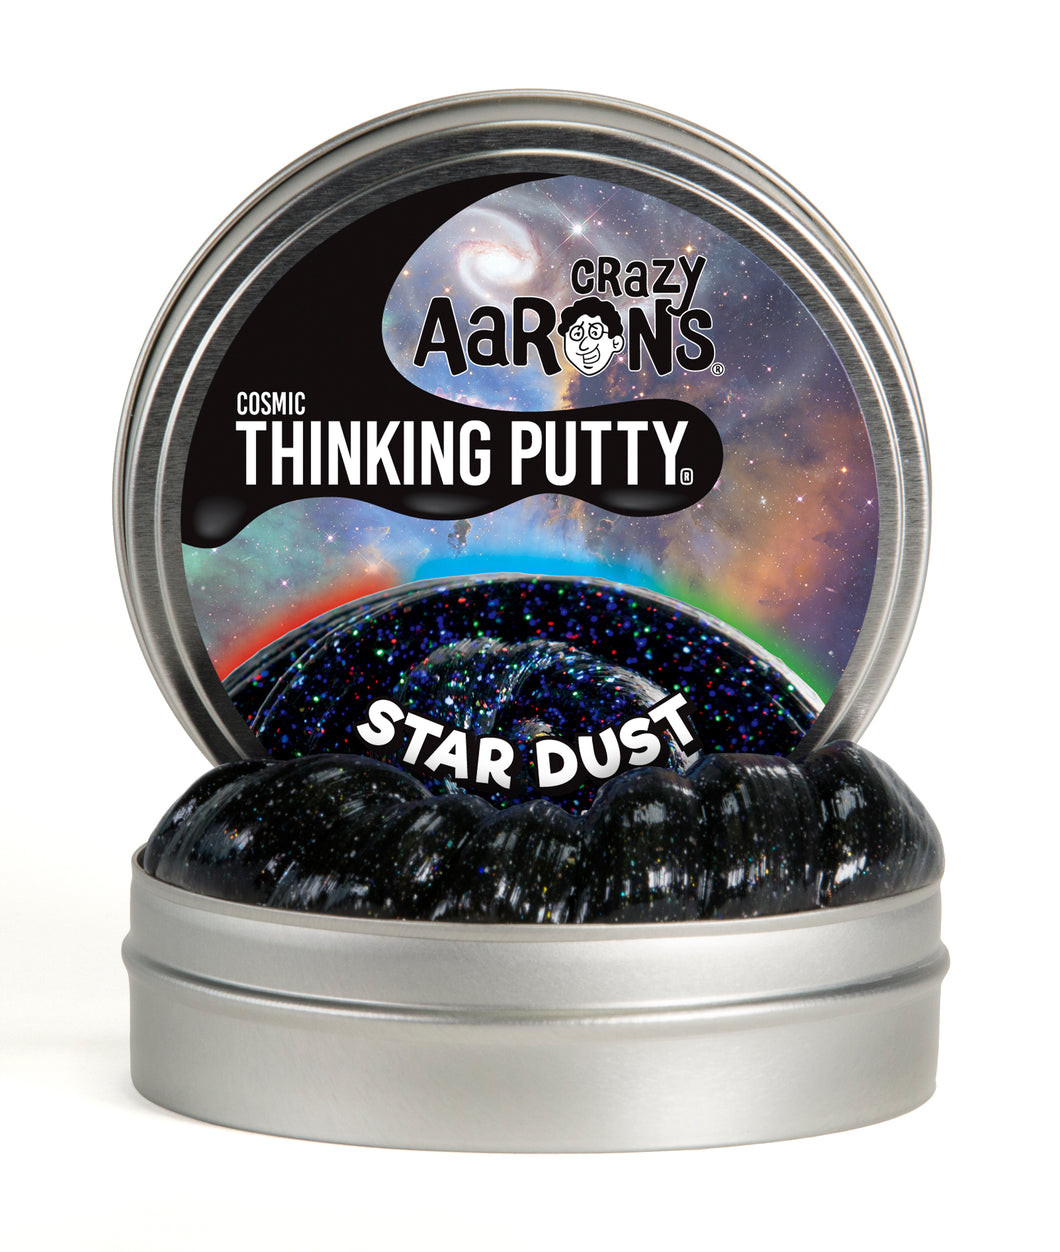 Crazy Aaron's Thinking Putty - Cosmic Glow - Star Dust